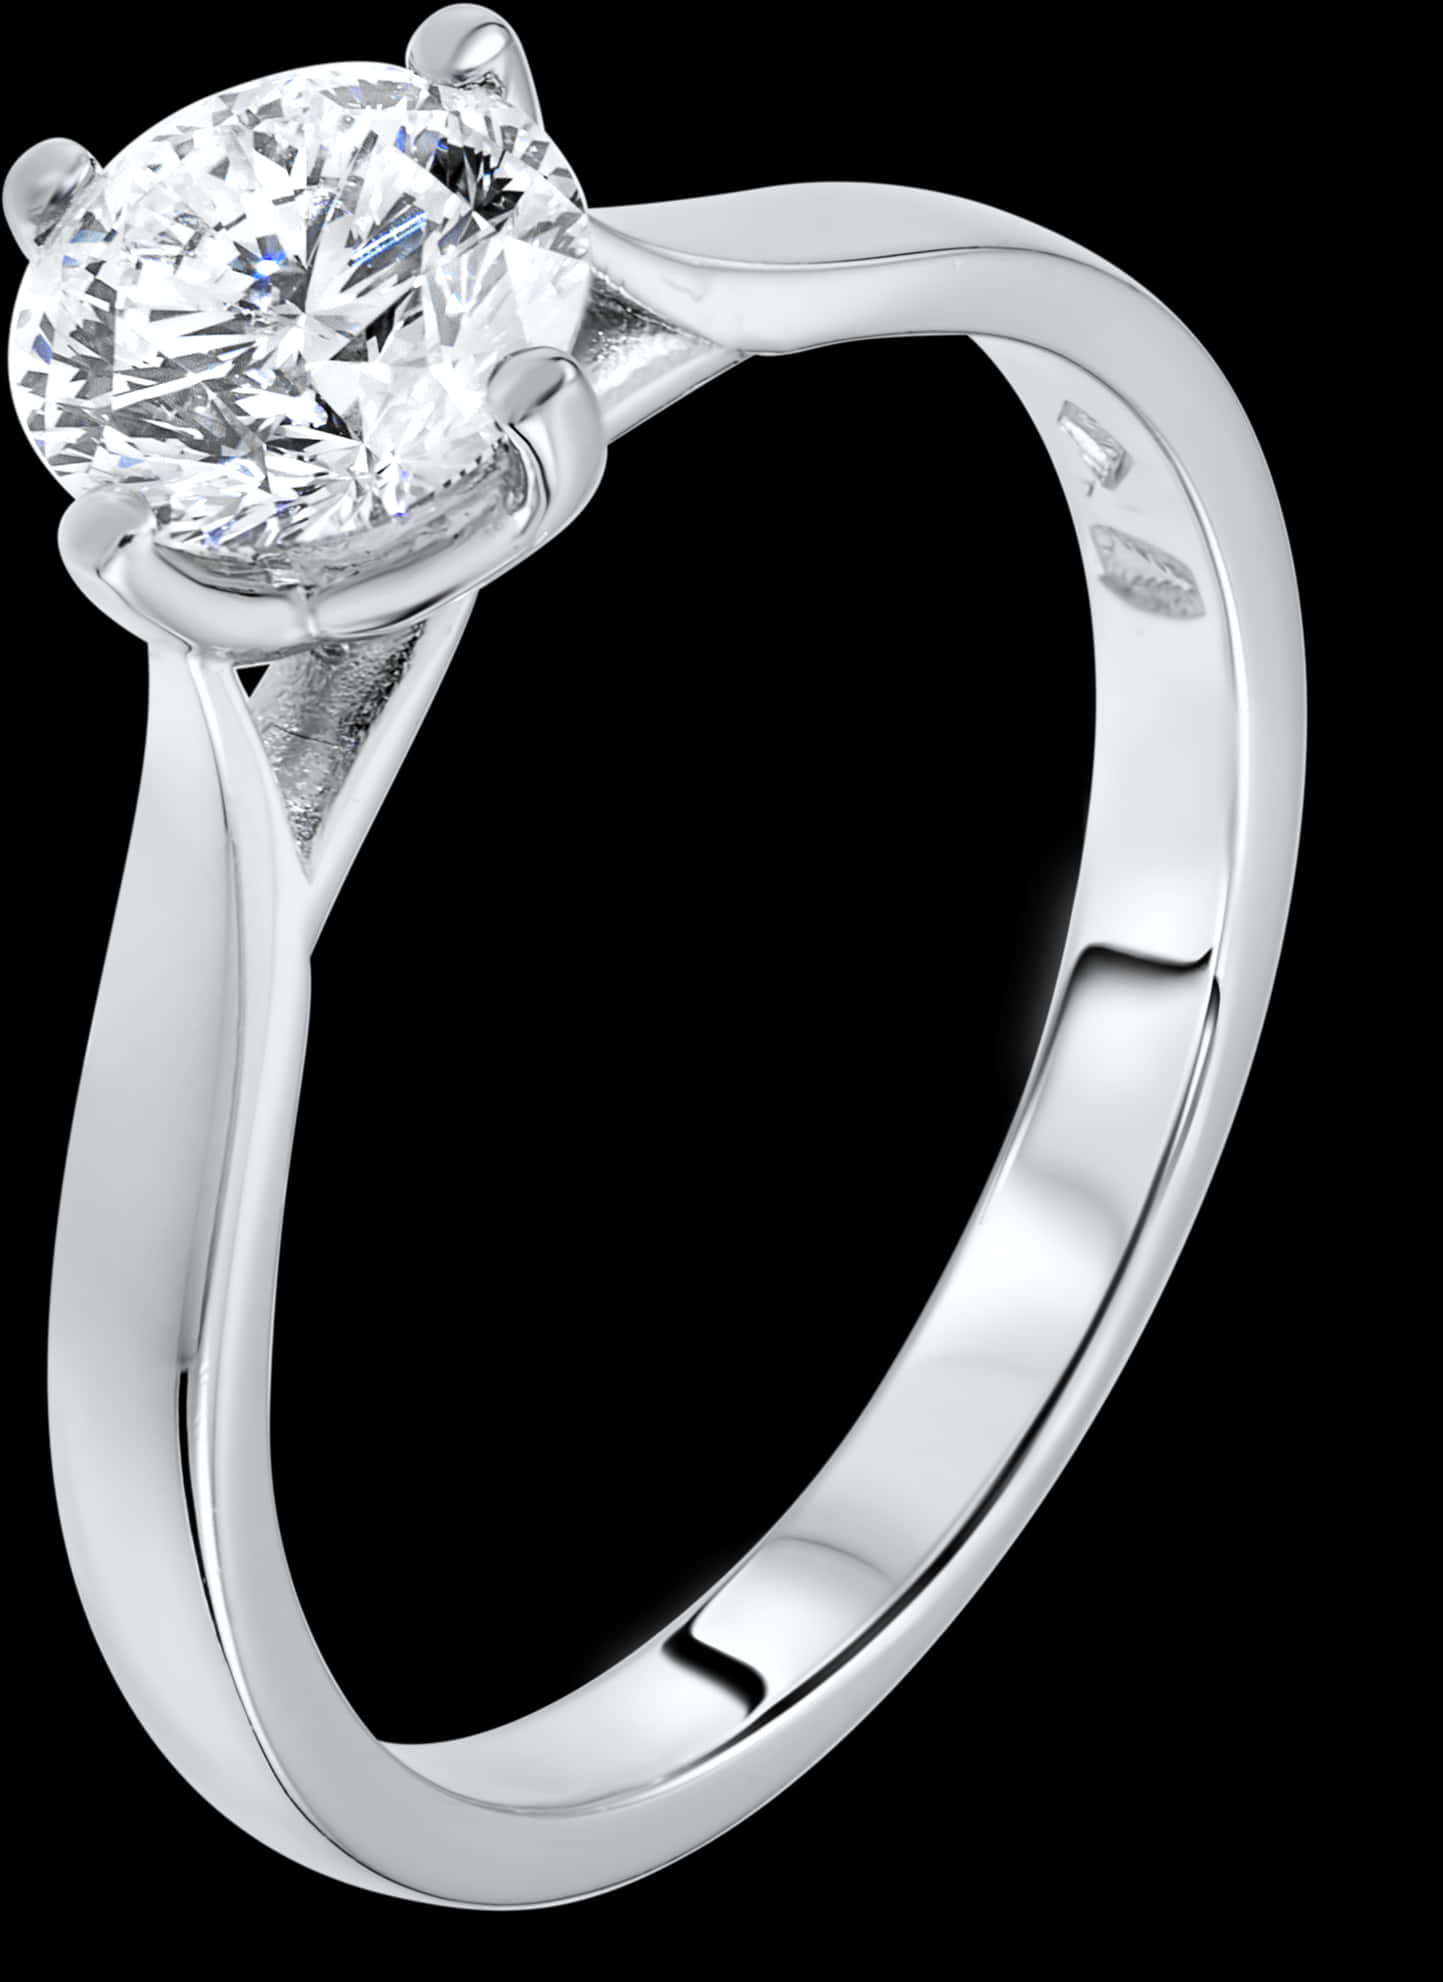 A Diamond Ring With A Black Background